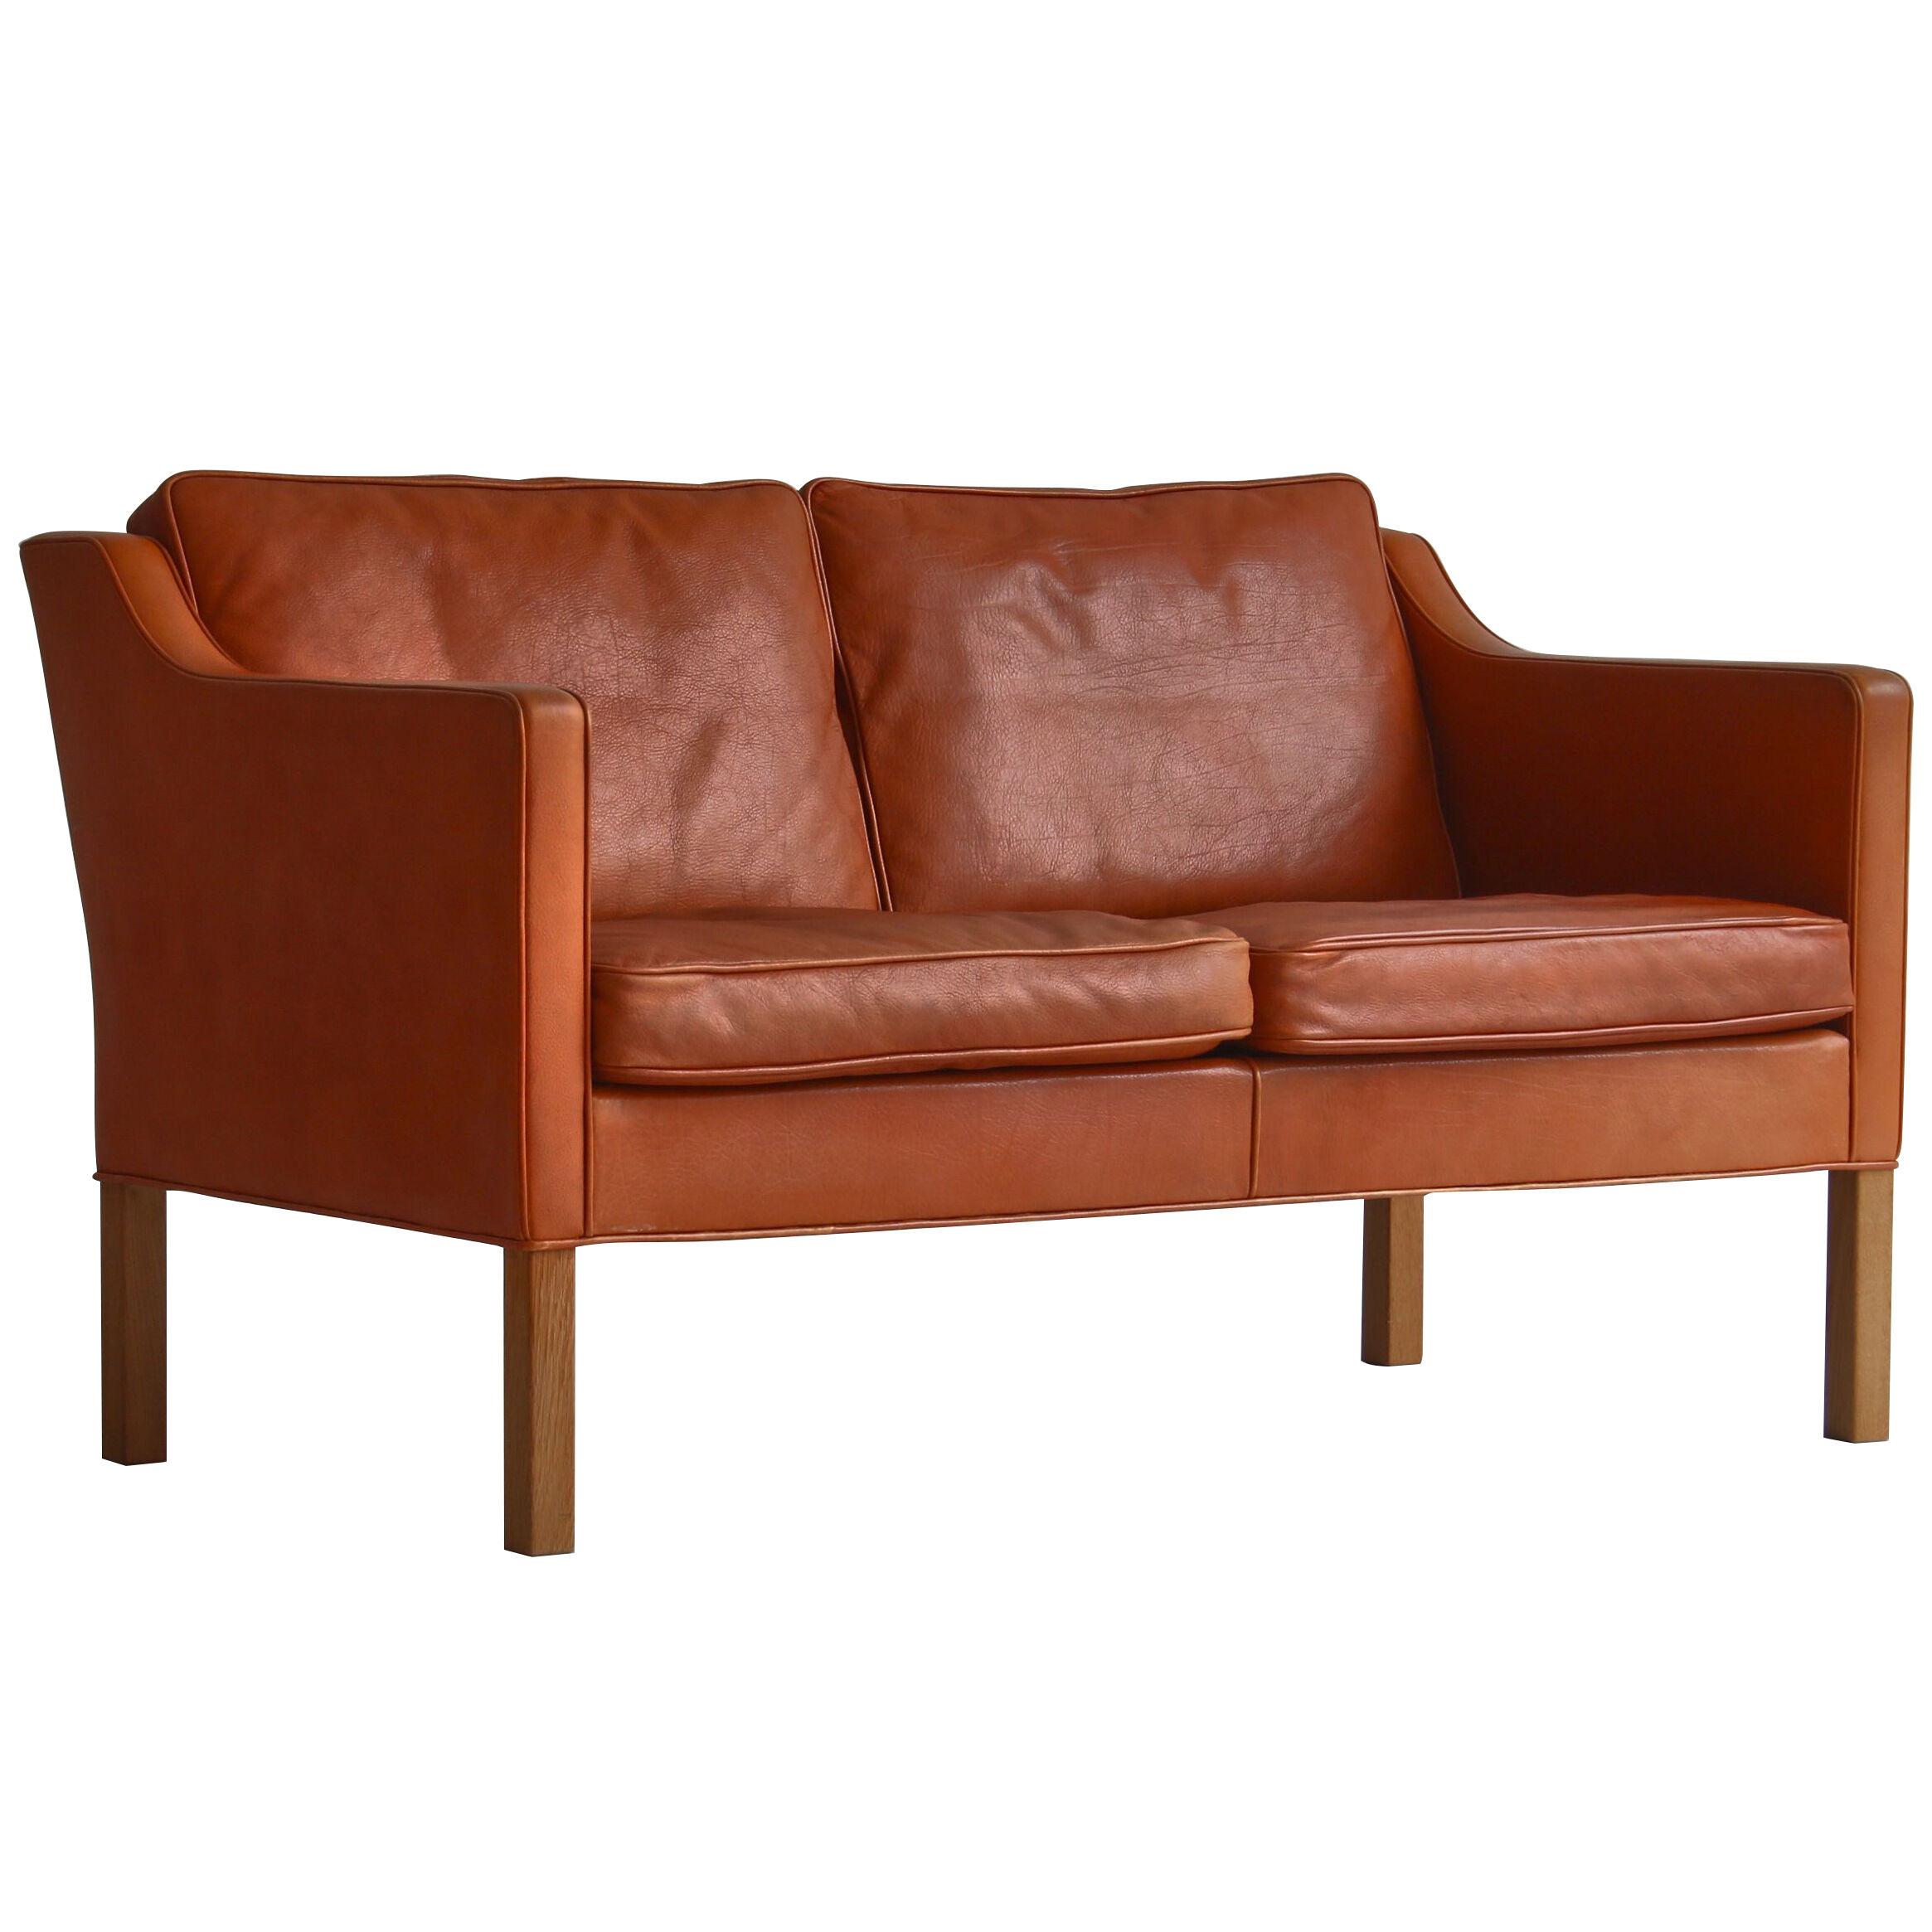 Børge Mogensen, Two Seater Sofa Model 2422 in Natural Leather and Oak, 1970s